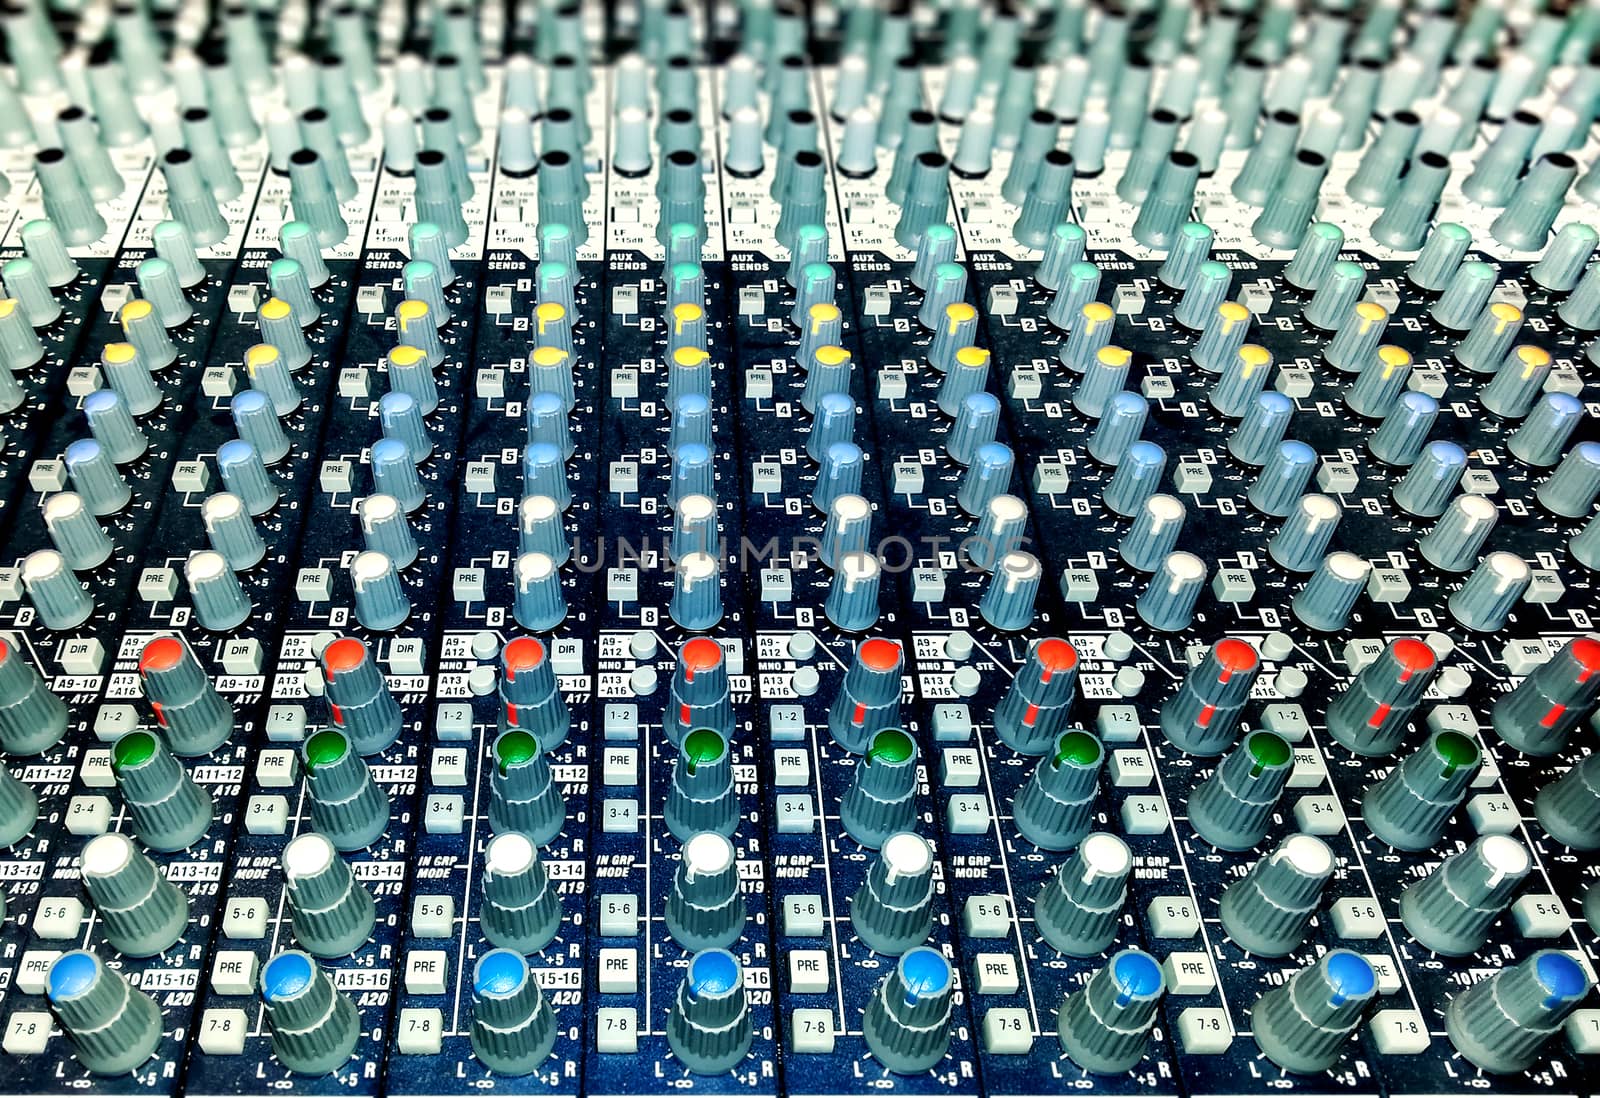  Professional  audio mixer with knobs and sliders